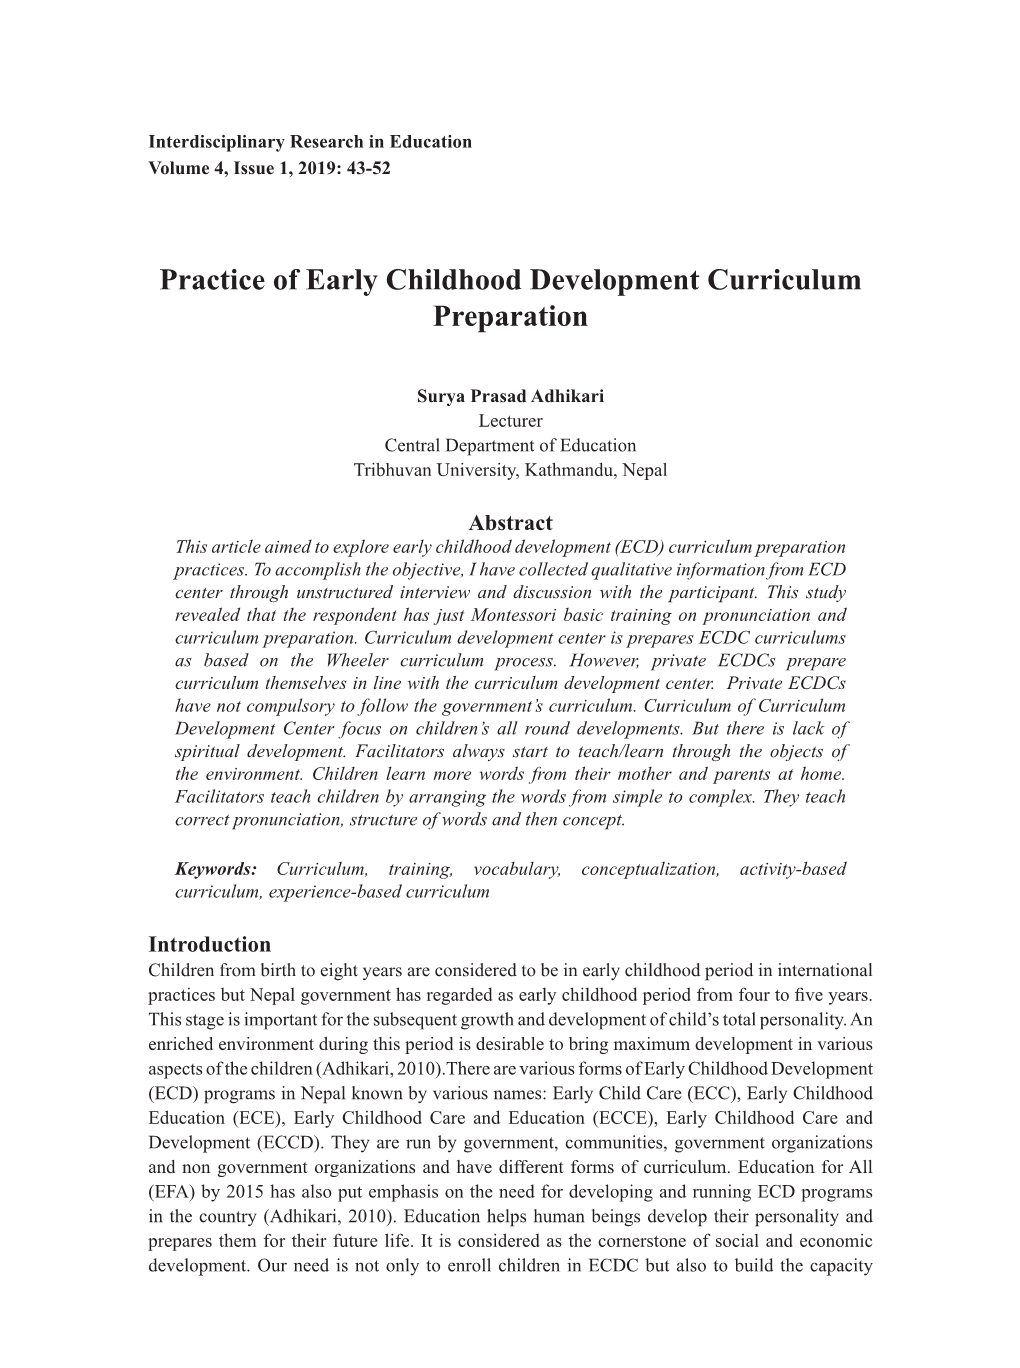 Practice of Early Childhood Development Curriculum Preparation